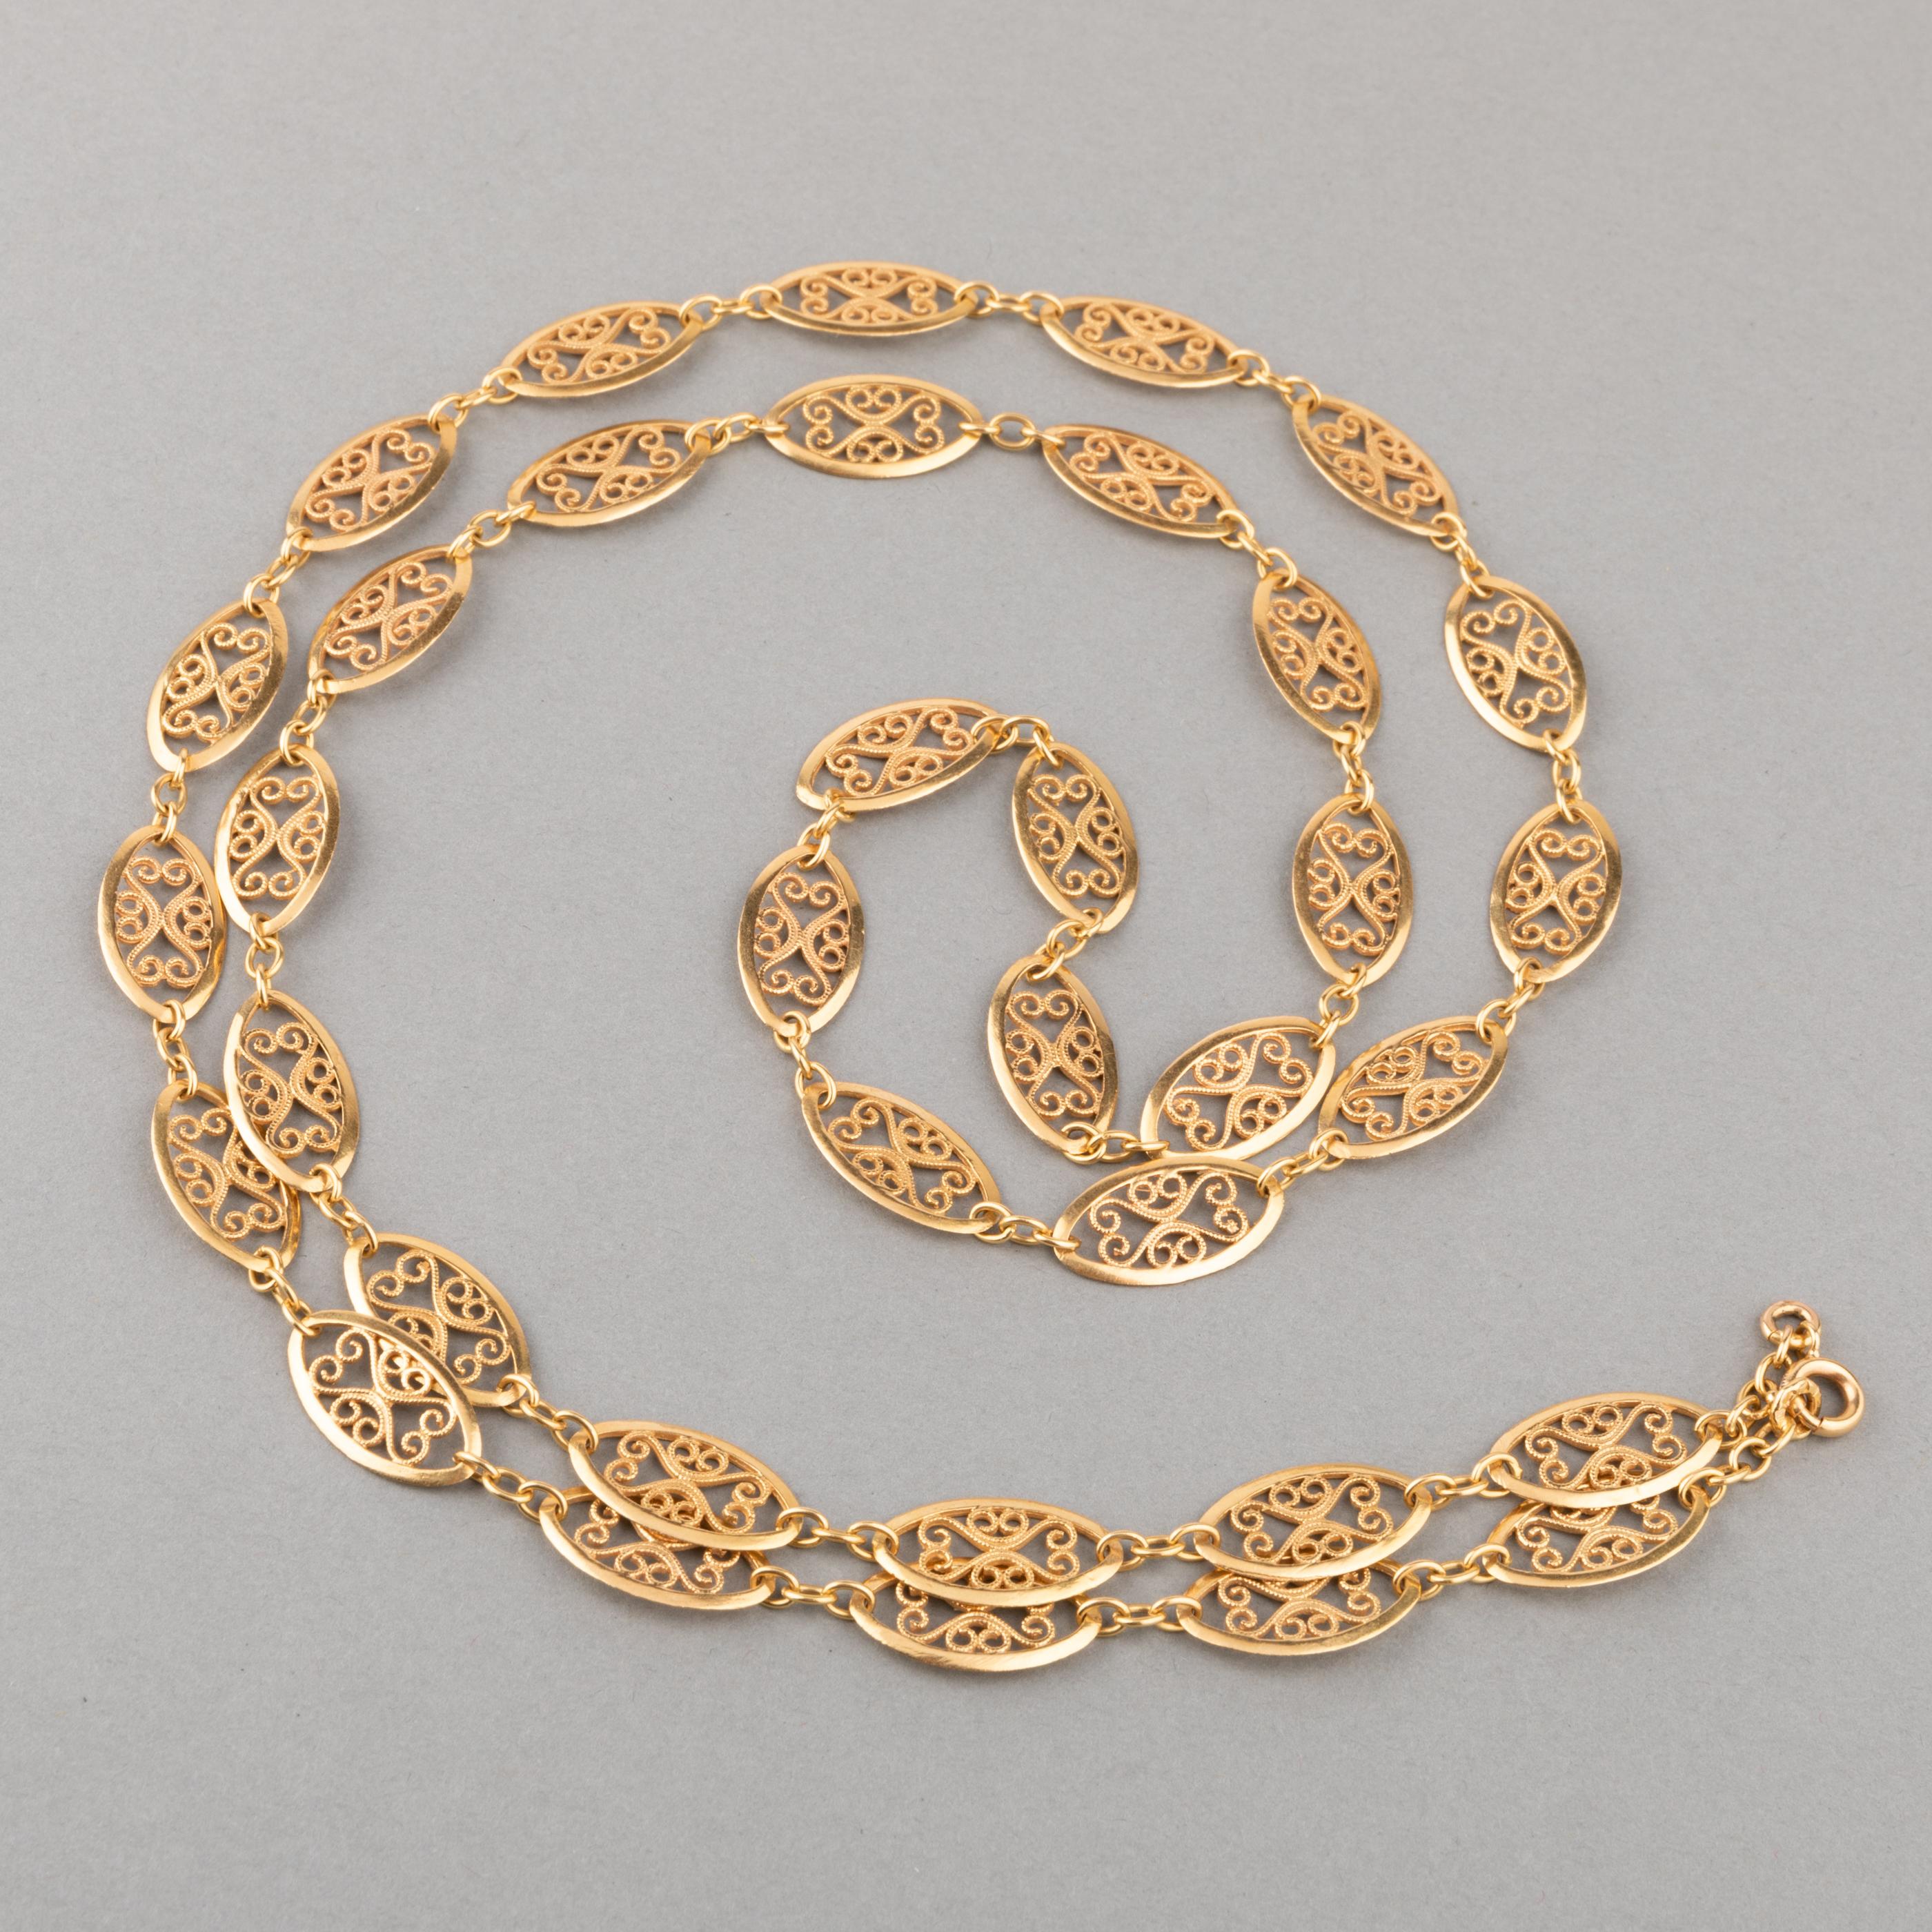 Antique French Gold Chain Necklace In Good Condition For Sale In Saint-Ouen, FR